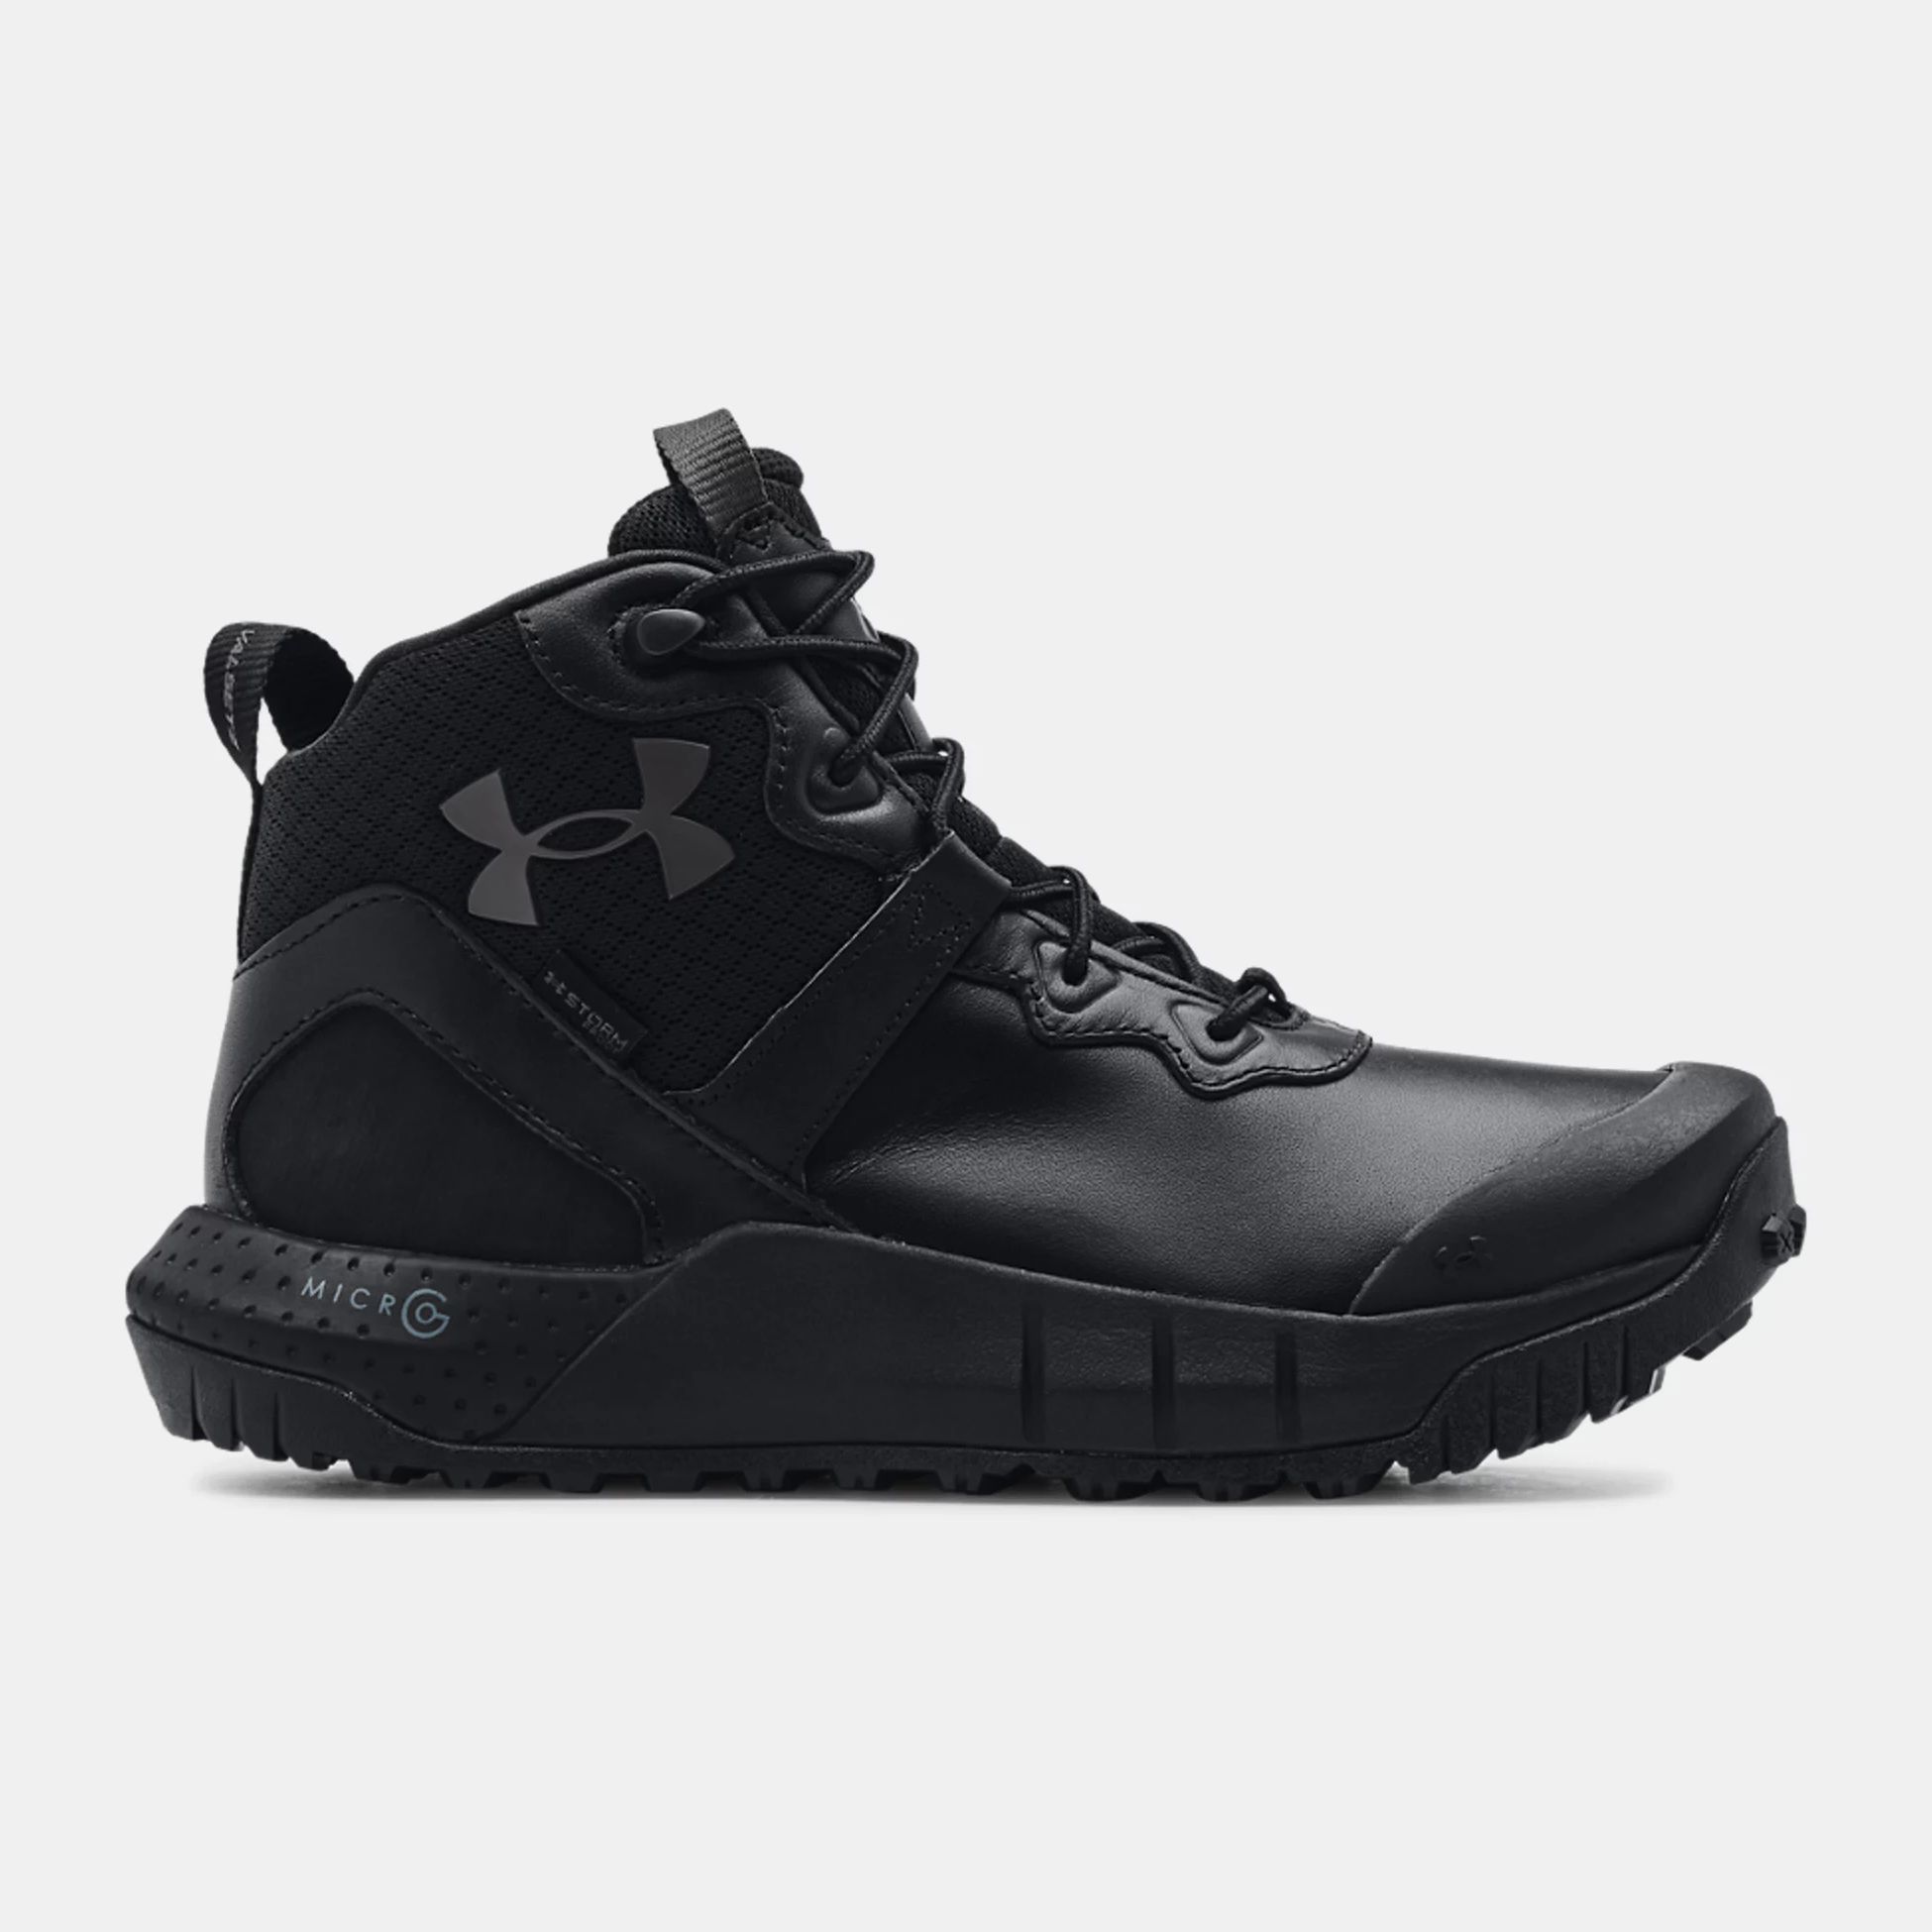 Outdoor Shoes -  under armour UA Micro G Valsetz Mid Leather Waterproof Tactical Boots